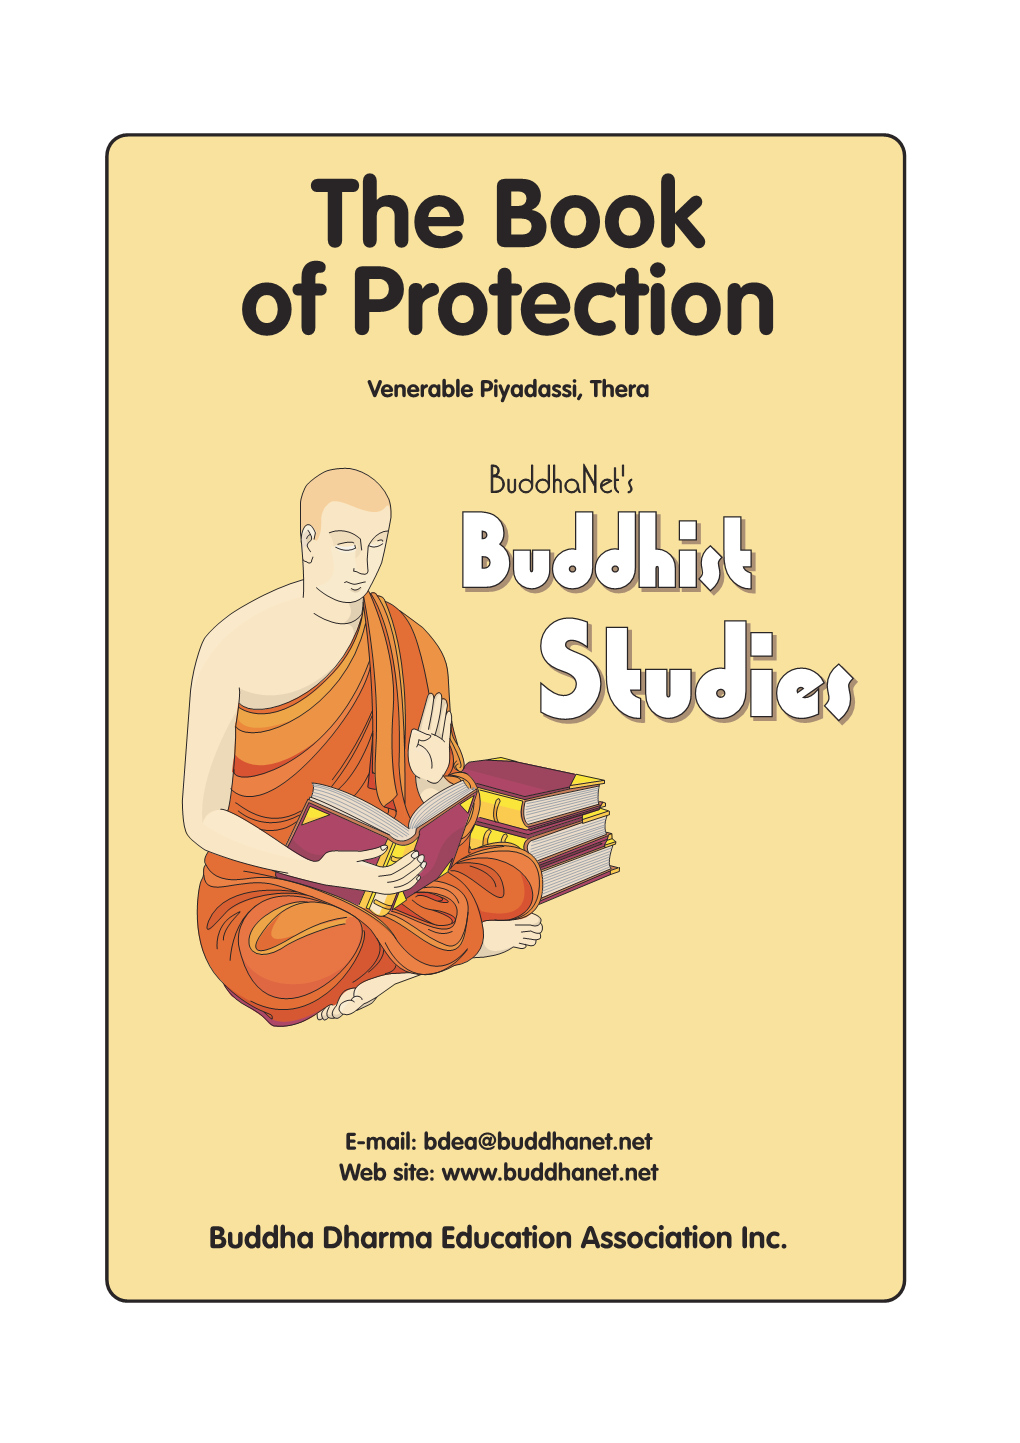 The Book of Protection Venerable Piyadassi, Thera